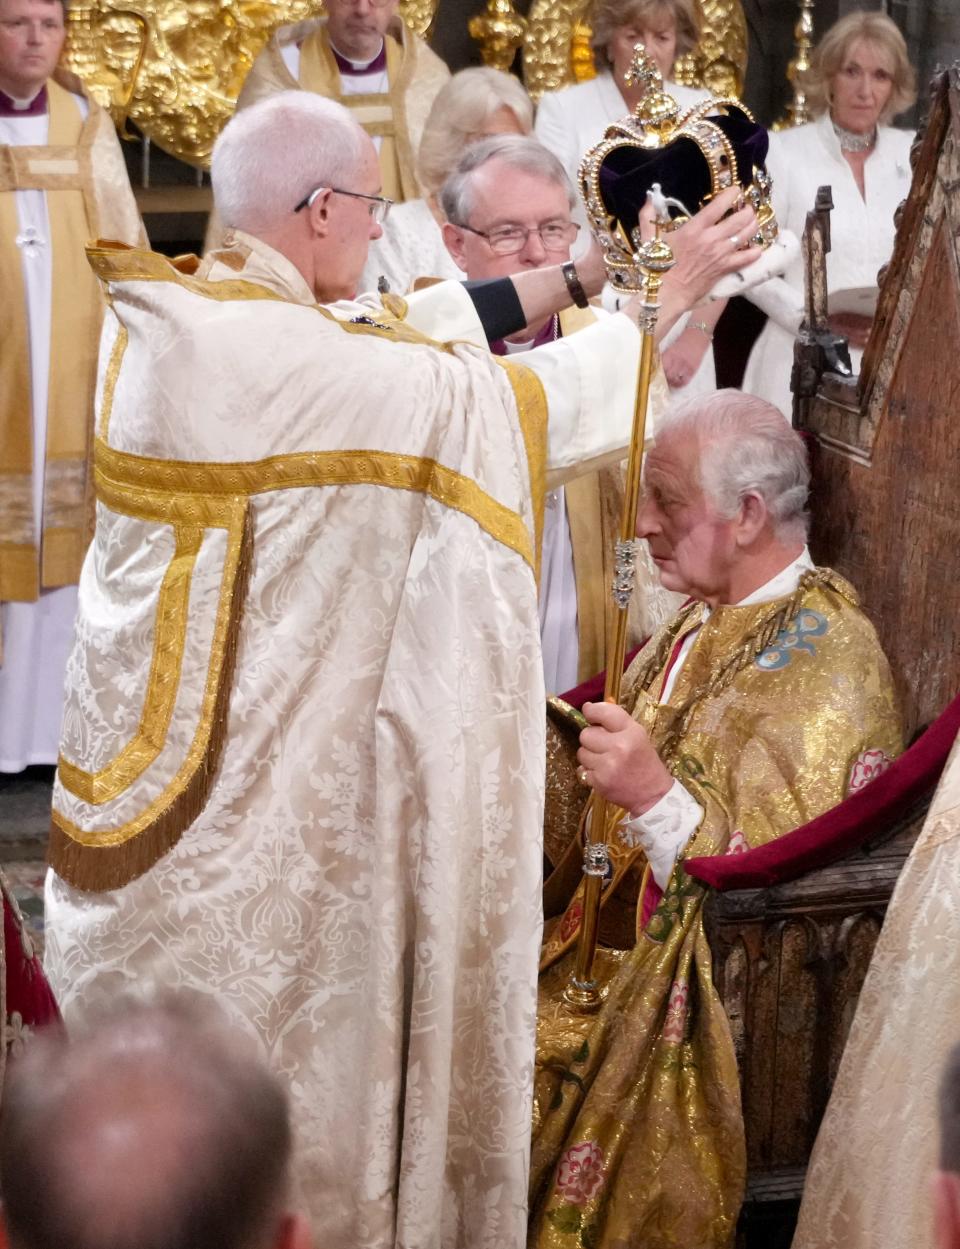 King Charles III is crowned with St. Edward's Crown by the Archbishop of Canterbury the Most Reverend Justin Welby during his coronation ceremony in Westminster Abbey on May 6 in London, England.